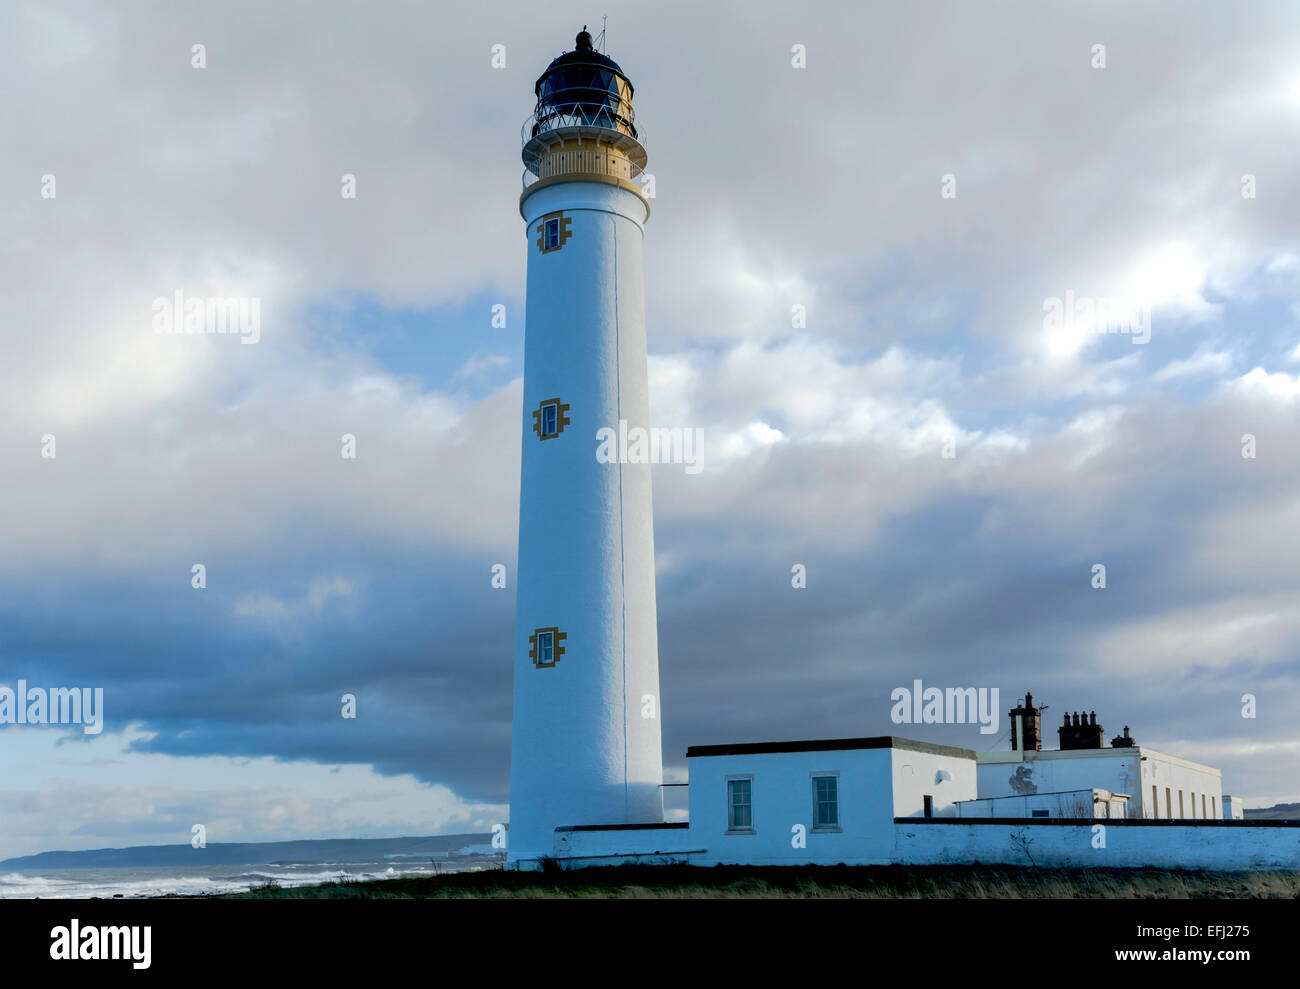 Barns Ness Lighthouse stands on the River Forth Estuary , near Dunbar, about 20 miles East of Edinburgh, Scotland. Stock Photo